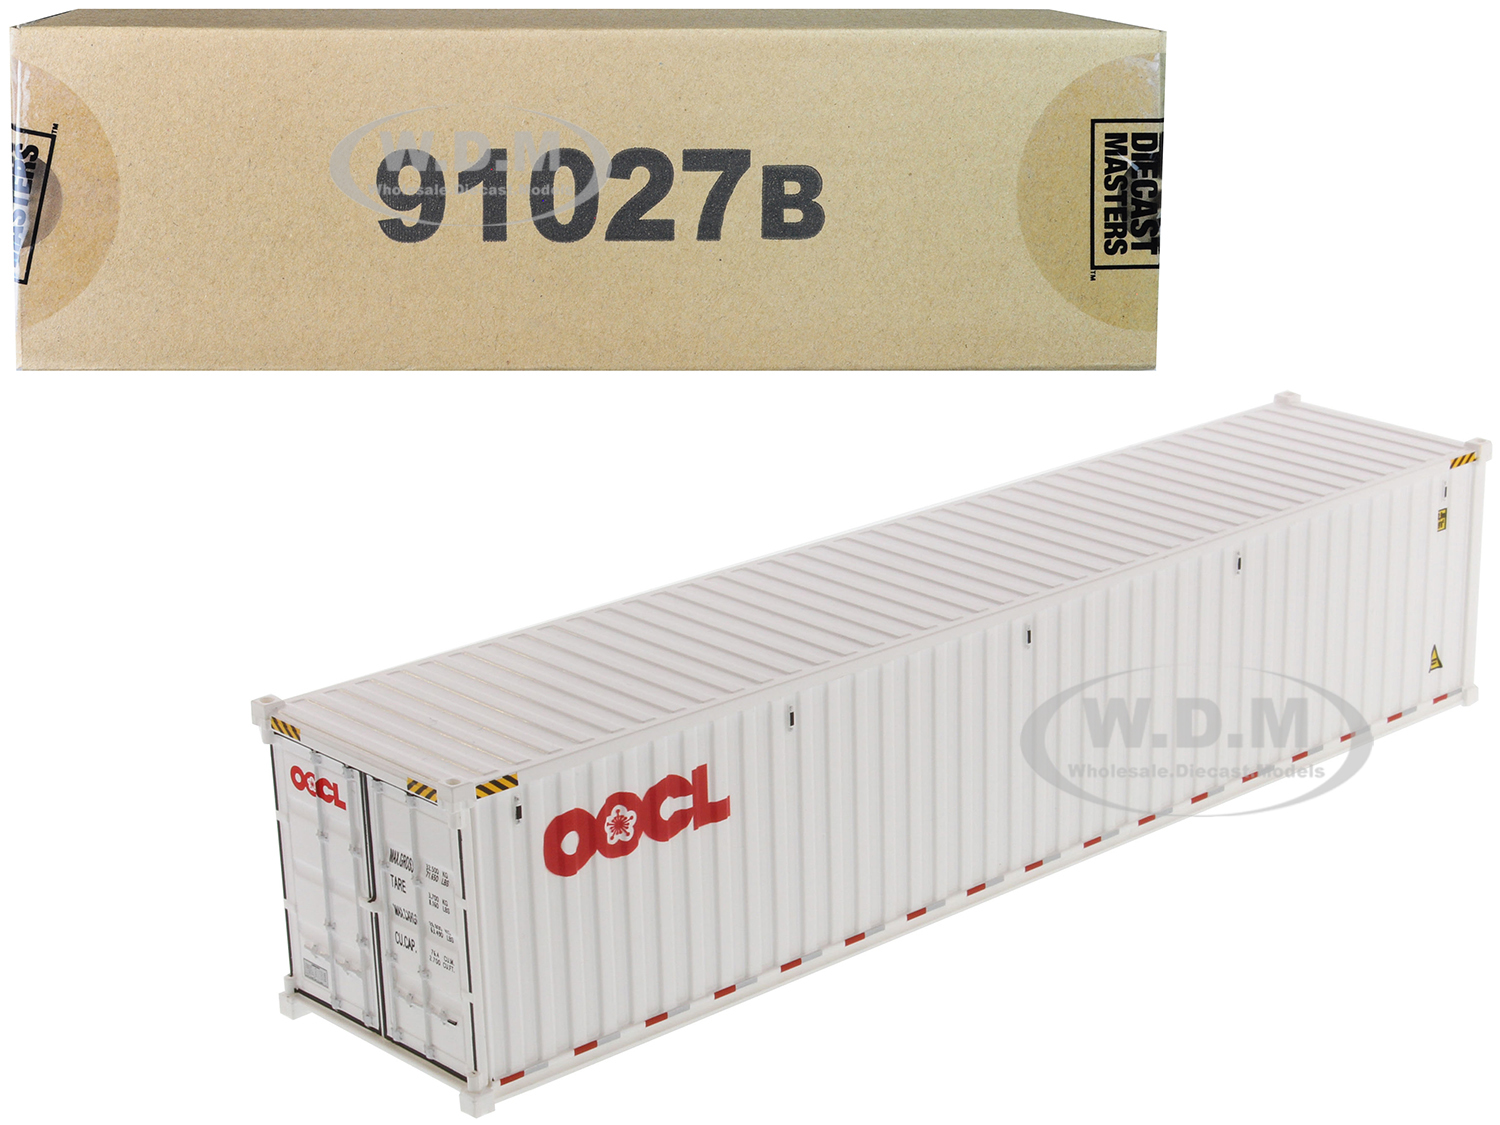 40 Dry Goods Sea Container "OOCL" White "Transport Series" 1/50 Model by Diecast Masters